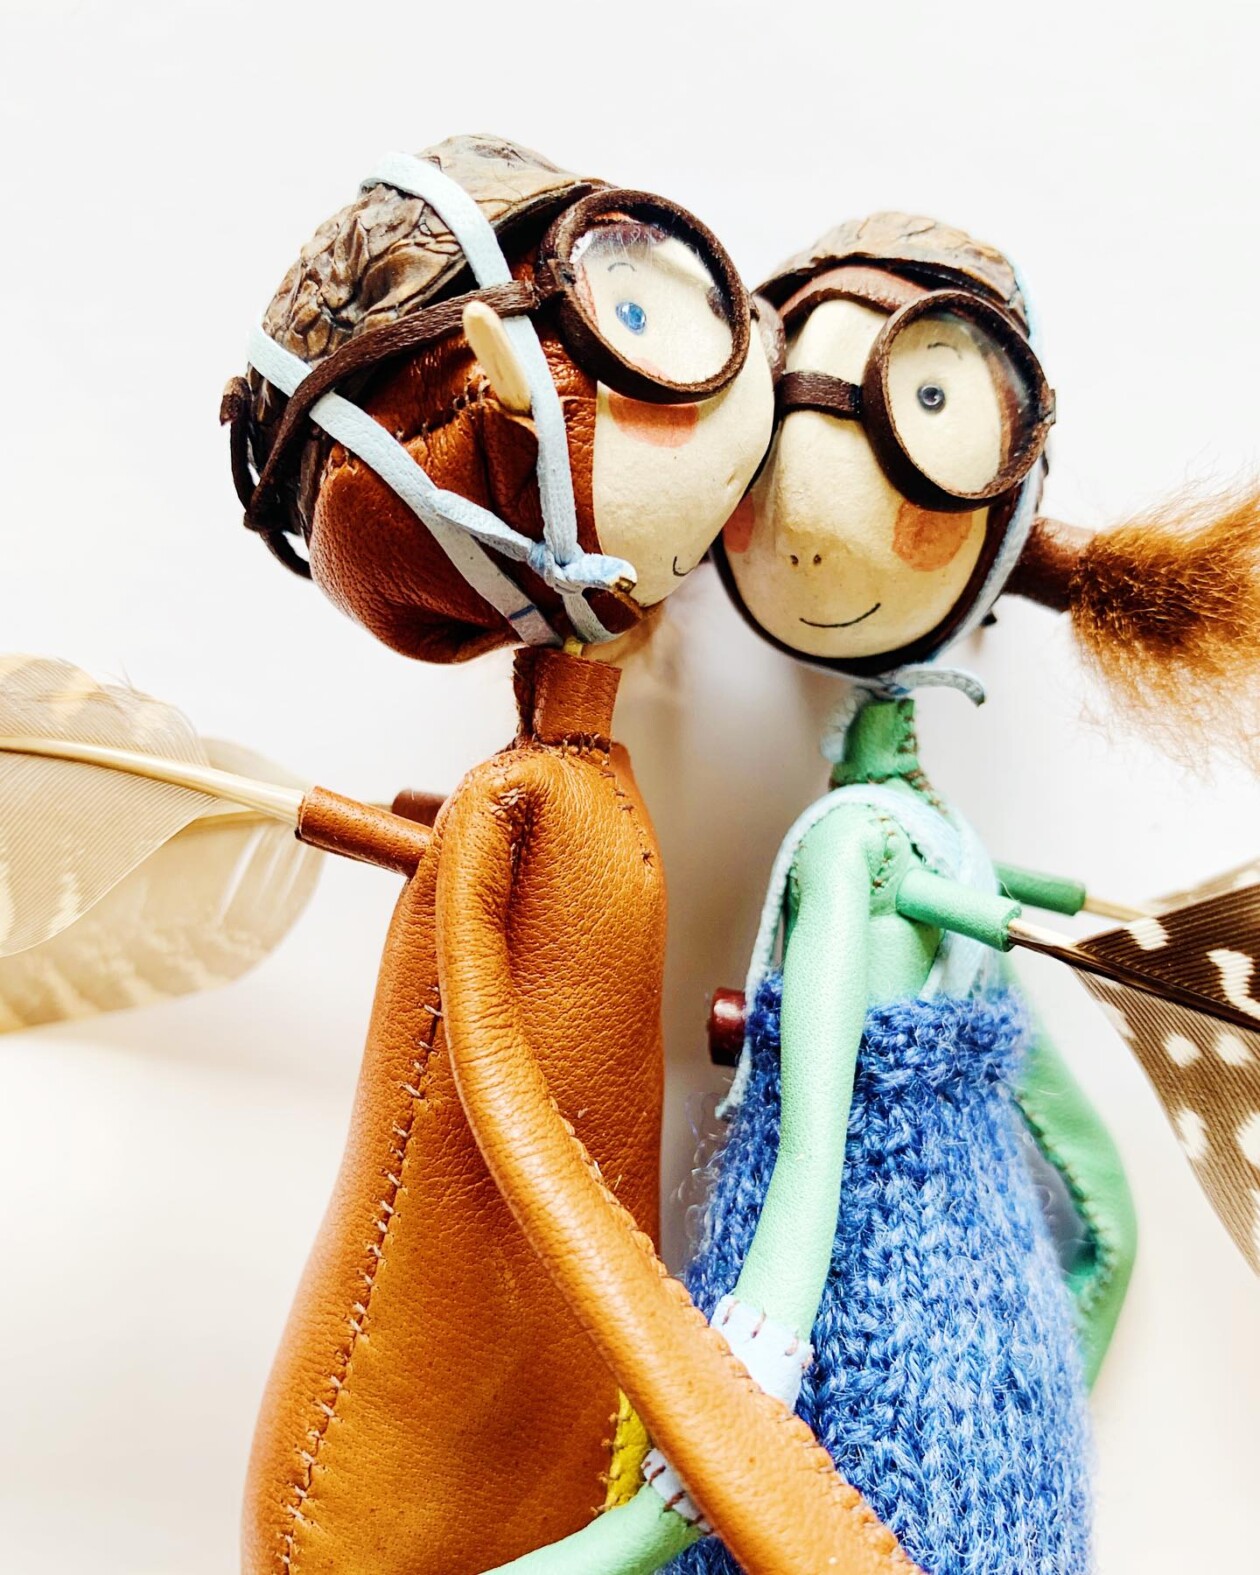 The Quirky And Amusing Fairy Lady Sculptures Of Samantha Bryan (14)